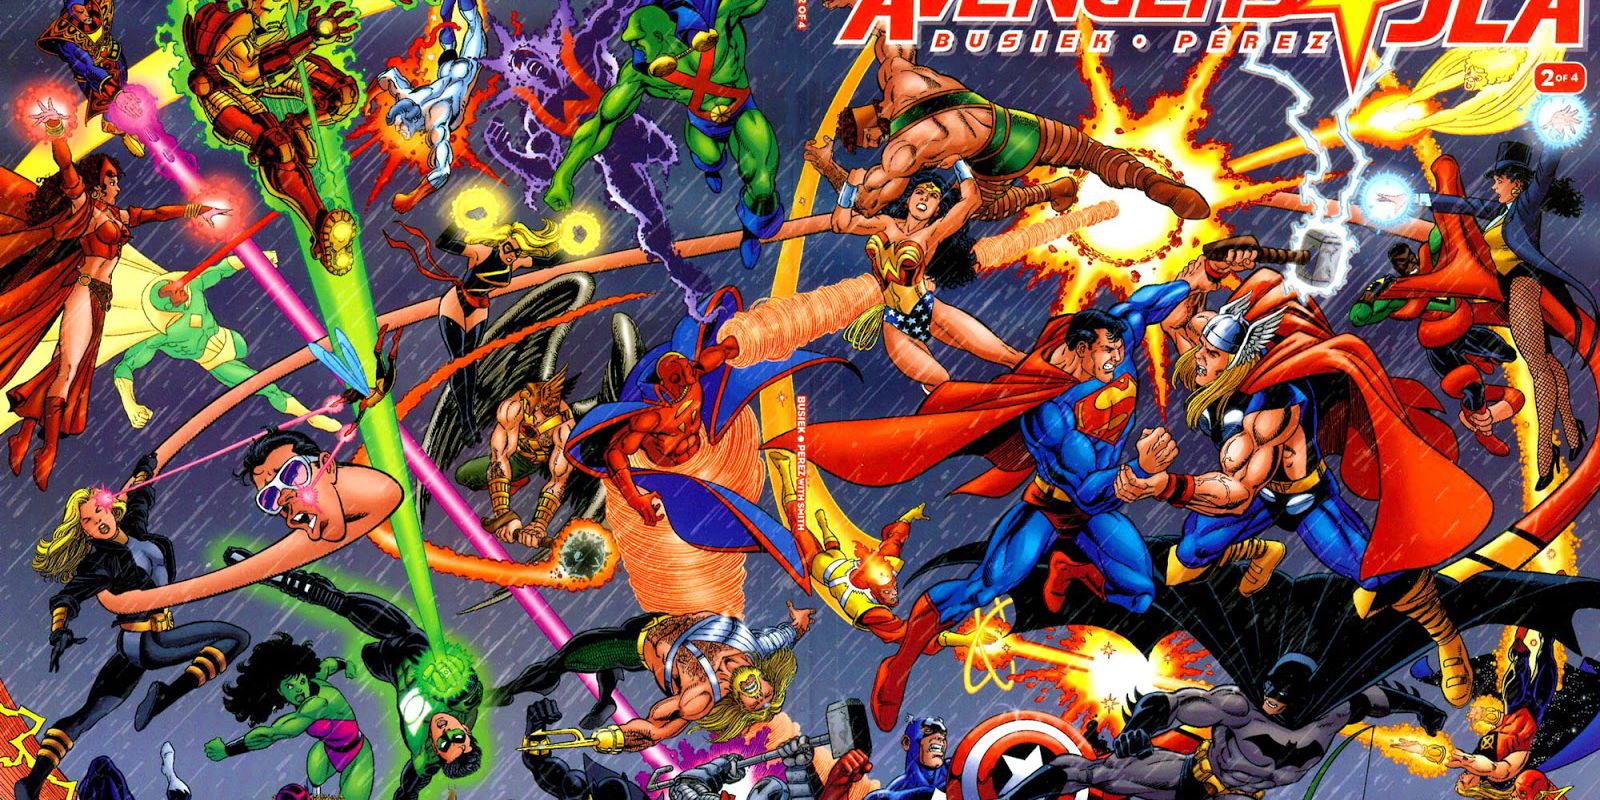 The characters of JLA and Avengers fighting against each other